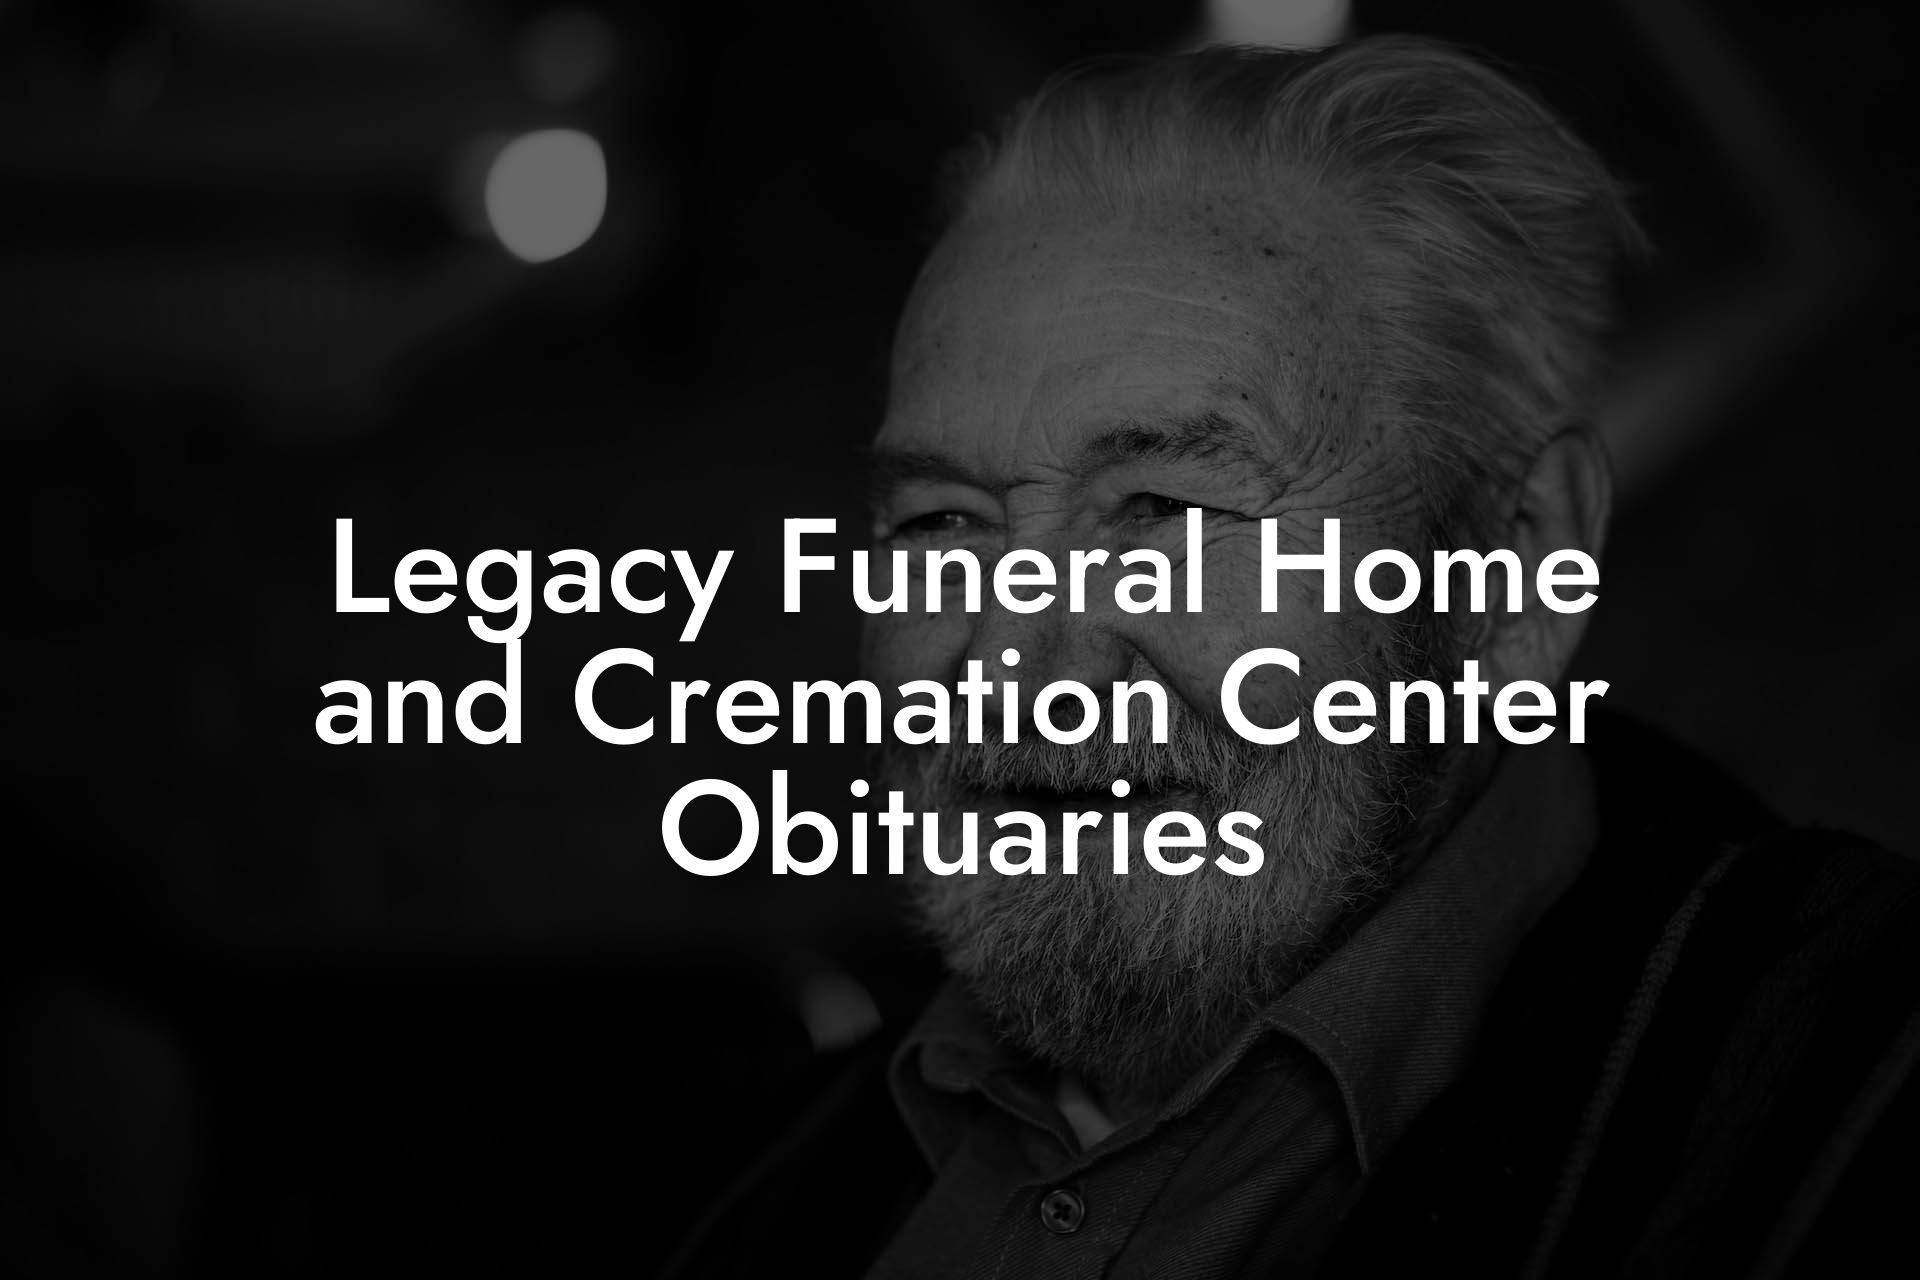 Legacy Funeral Home and Cremation Center Obituaries